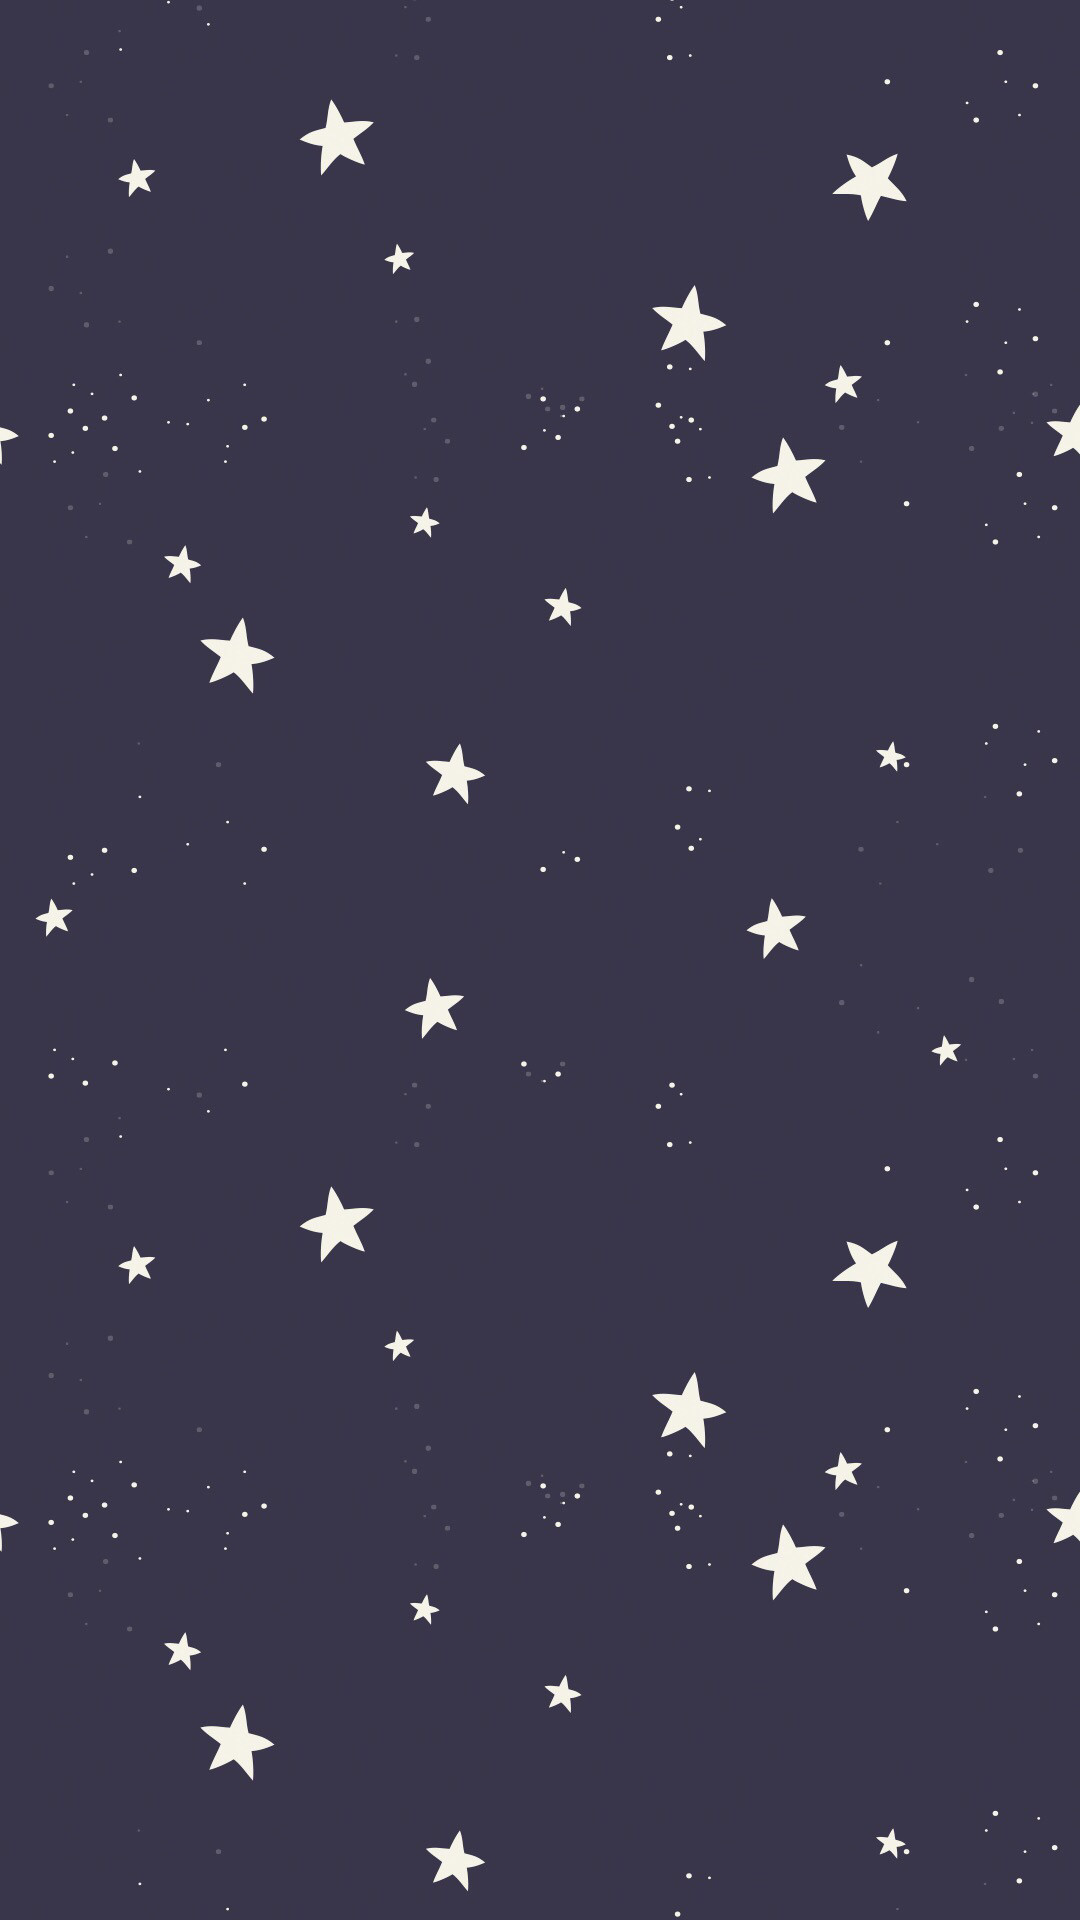 Simple stars pattern wallpaper great for backgrounds on iPhones and iPads